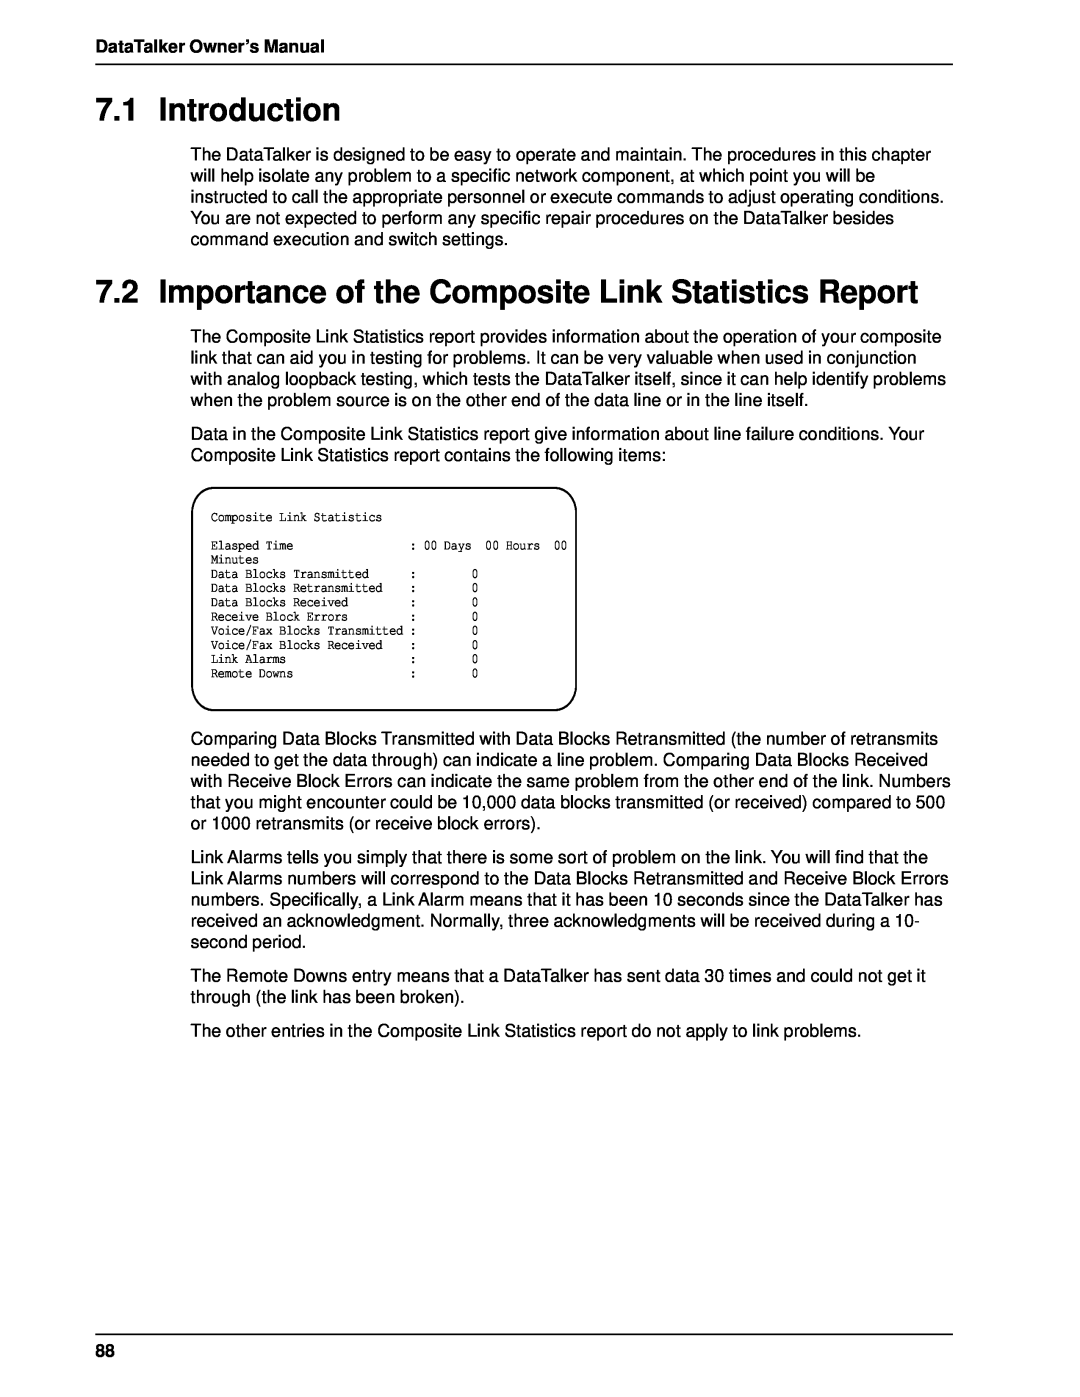 Multi-Tech Systems DT101 Introduction, Importance of the Composite Link Statistics Report, DataTalker Owner’s Manual 